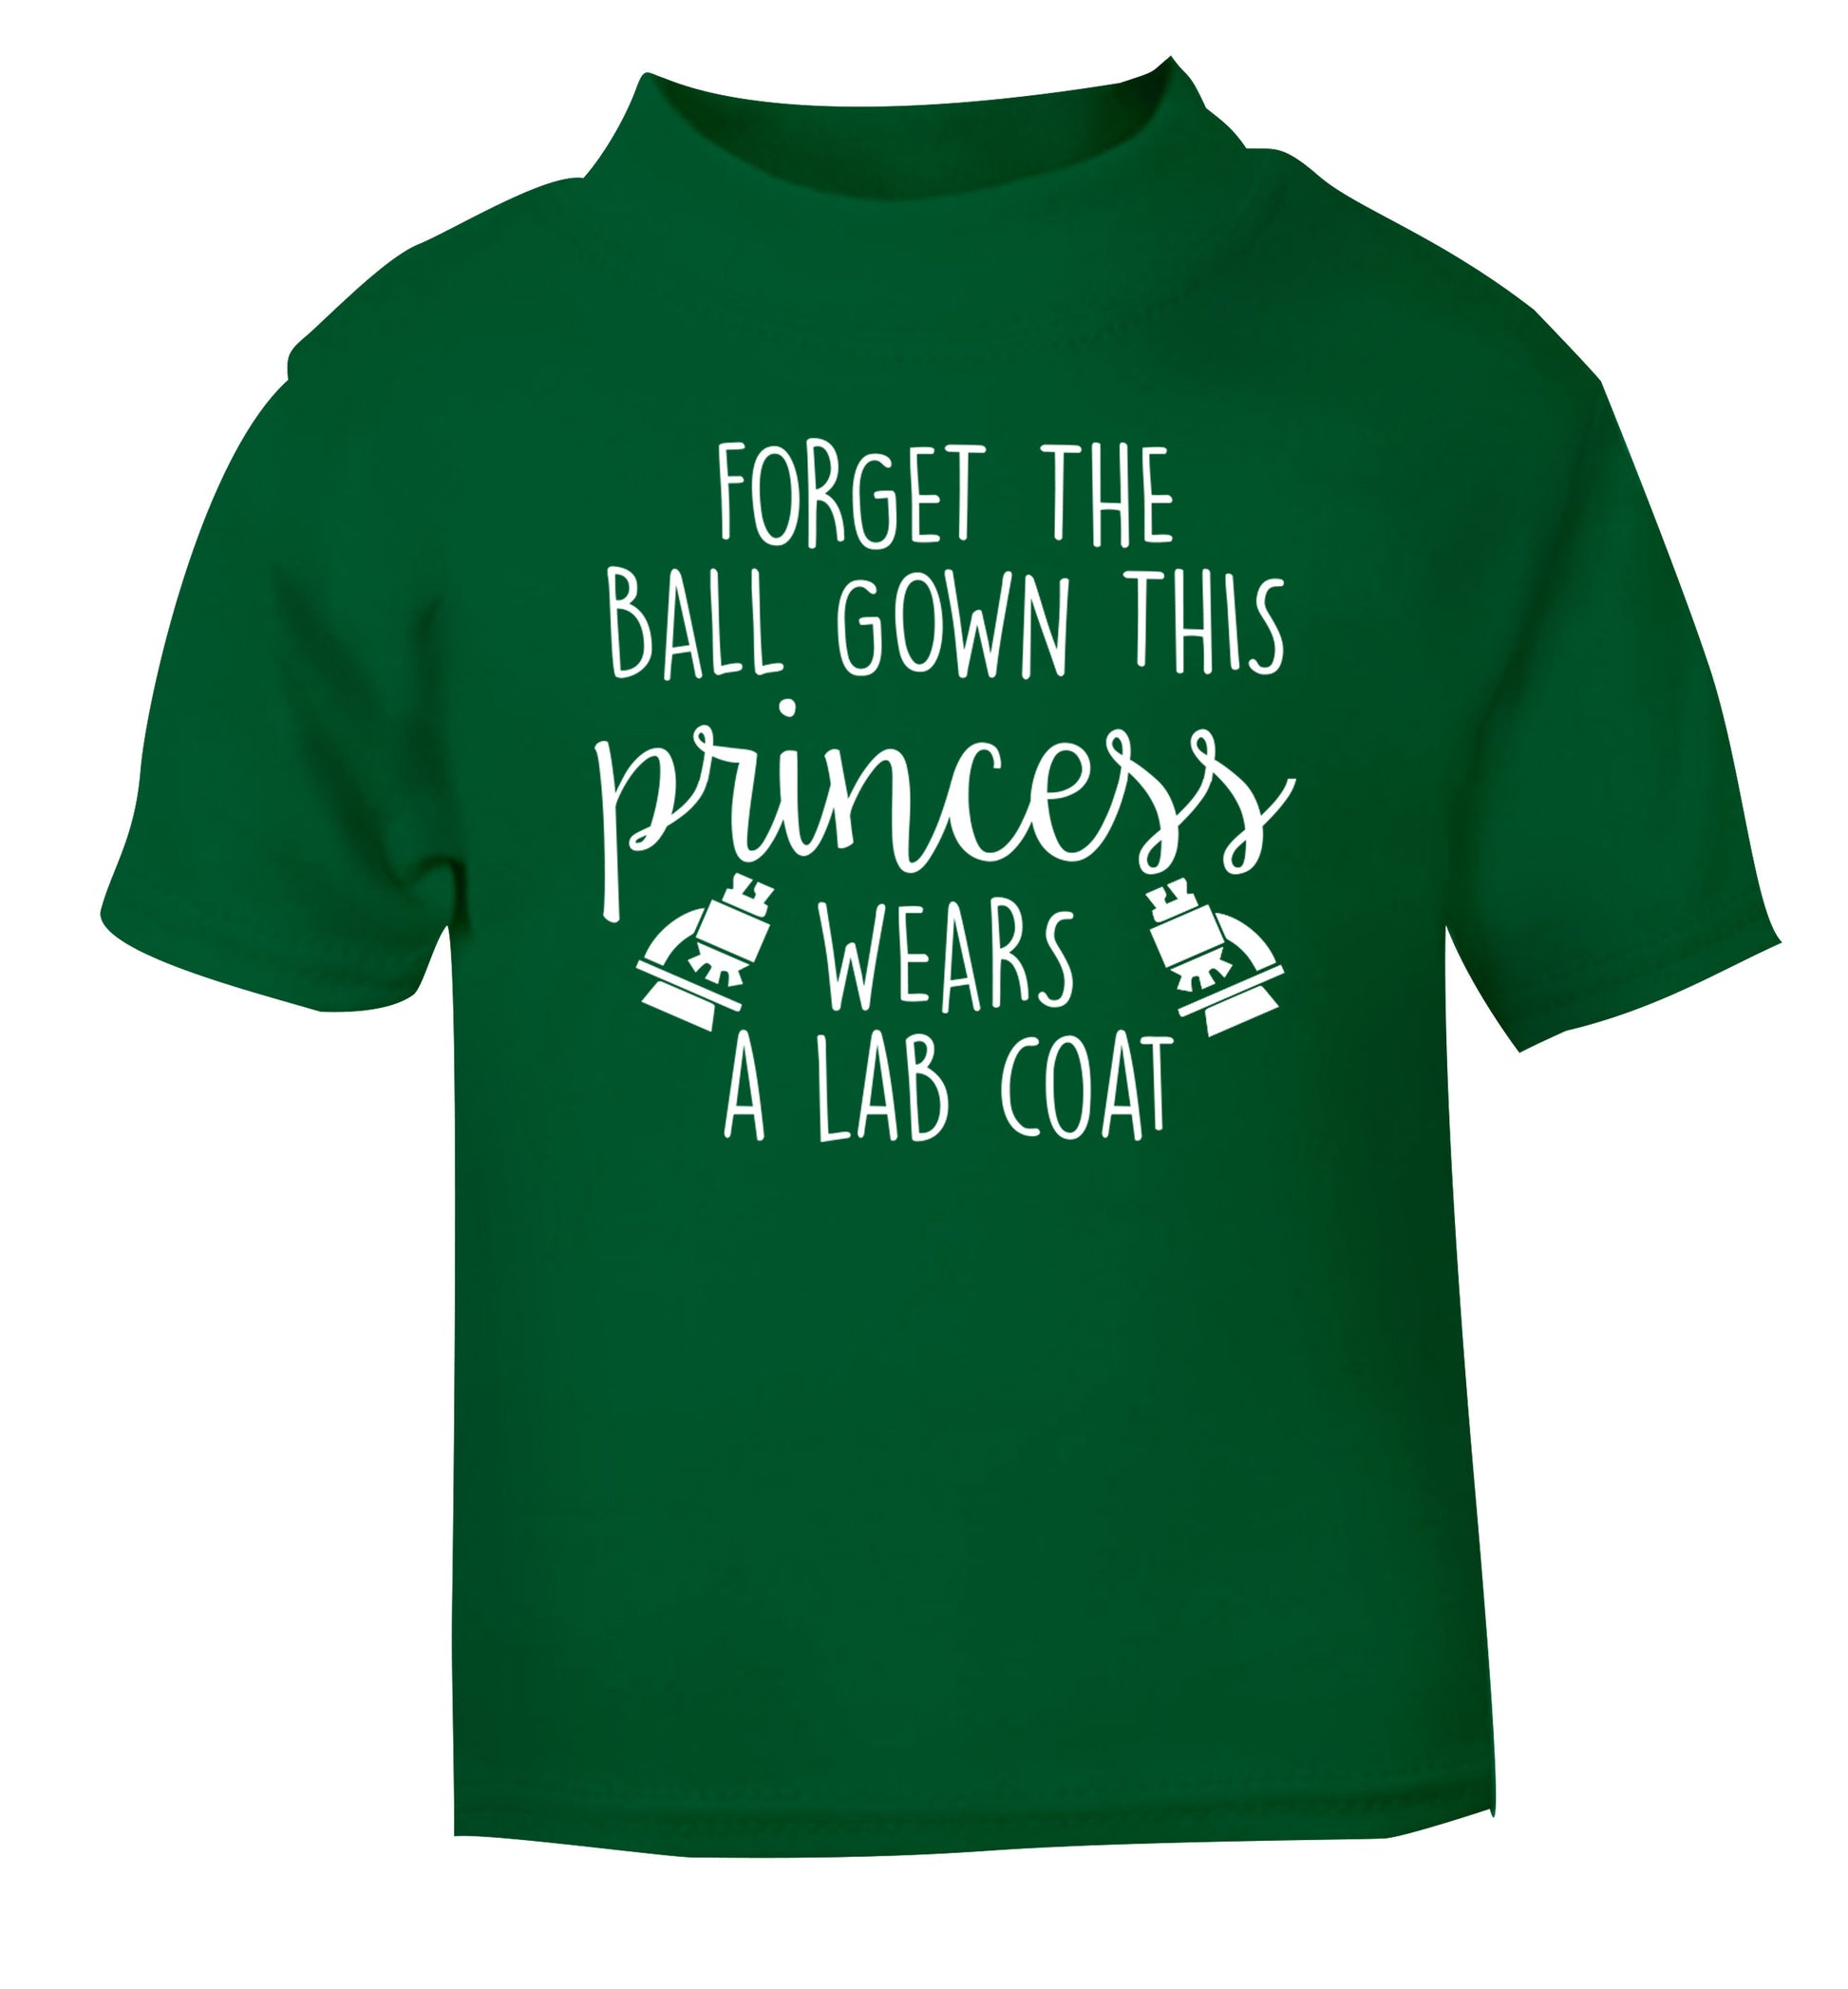 Forget the ball gown this princess wears a lab coat green Baby Toddler Tshirt 2 Years